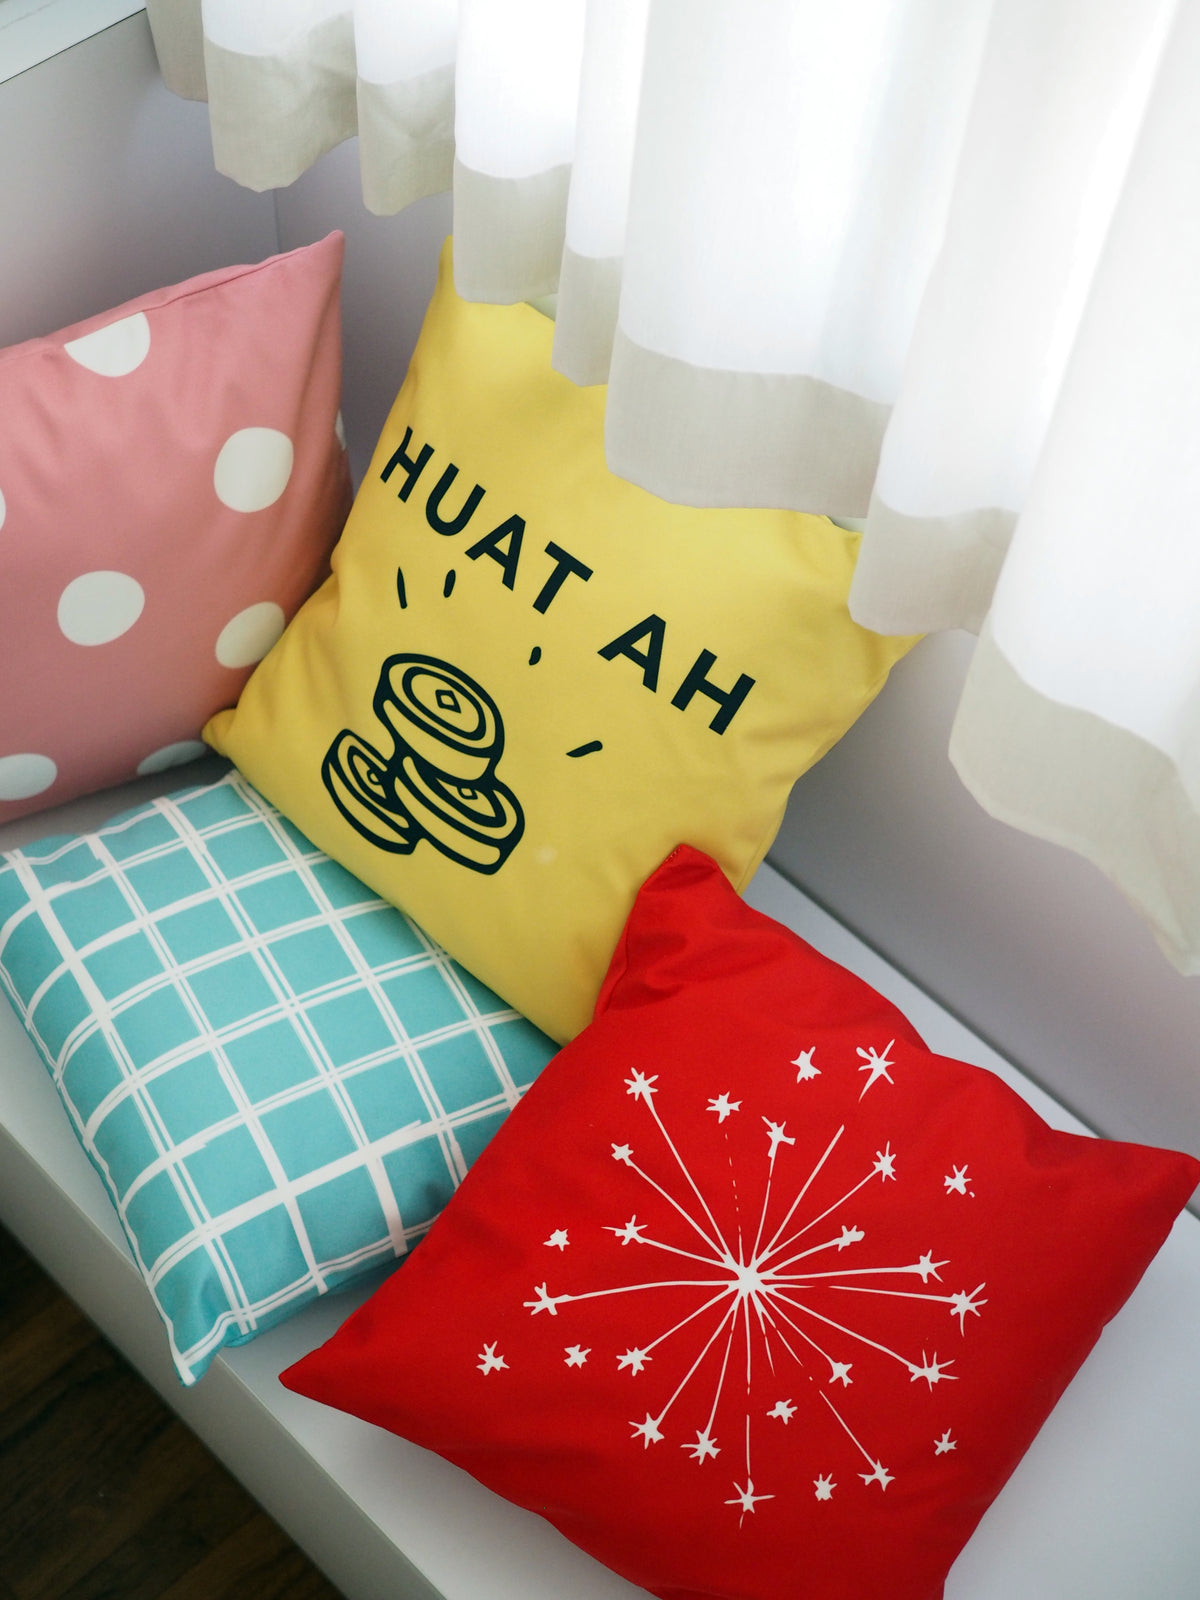 Flannel Double Sided Printed CNY HENG AH Cushion Covers PPD657B